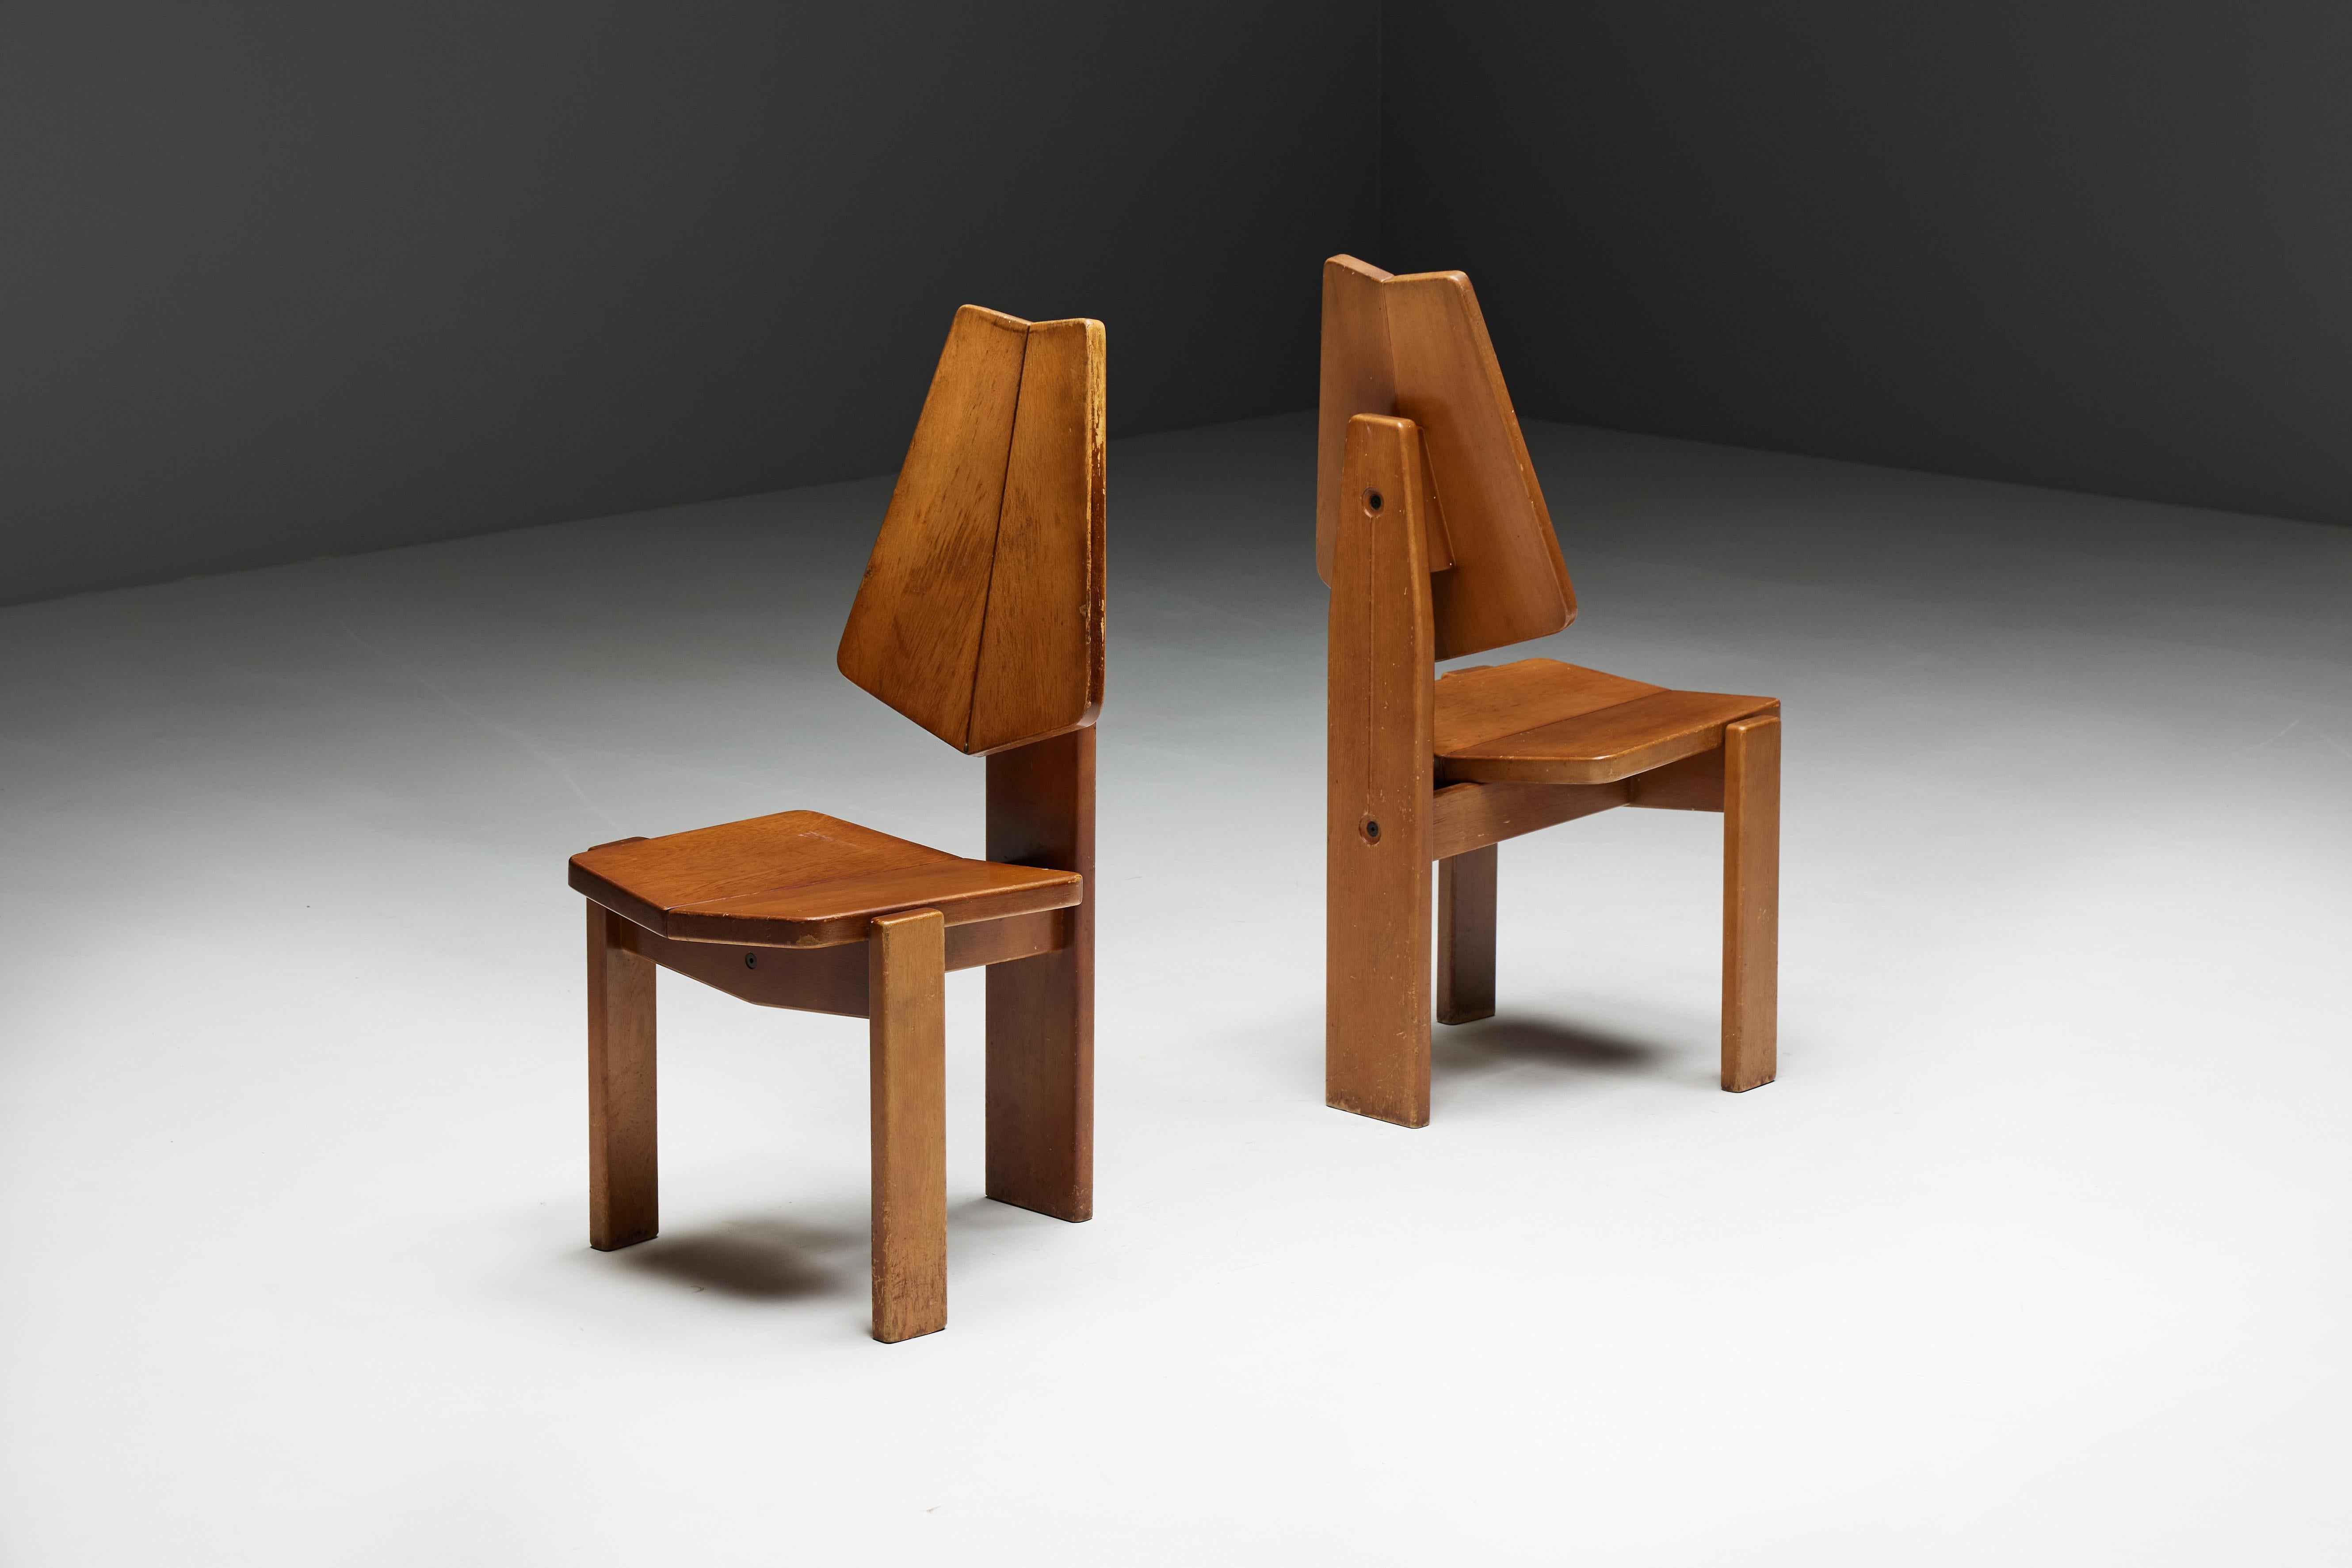 Brutalist Wooden Dining Chairs, Belgium, 1970s For Sale 3